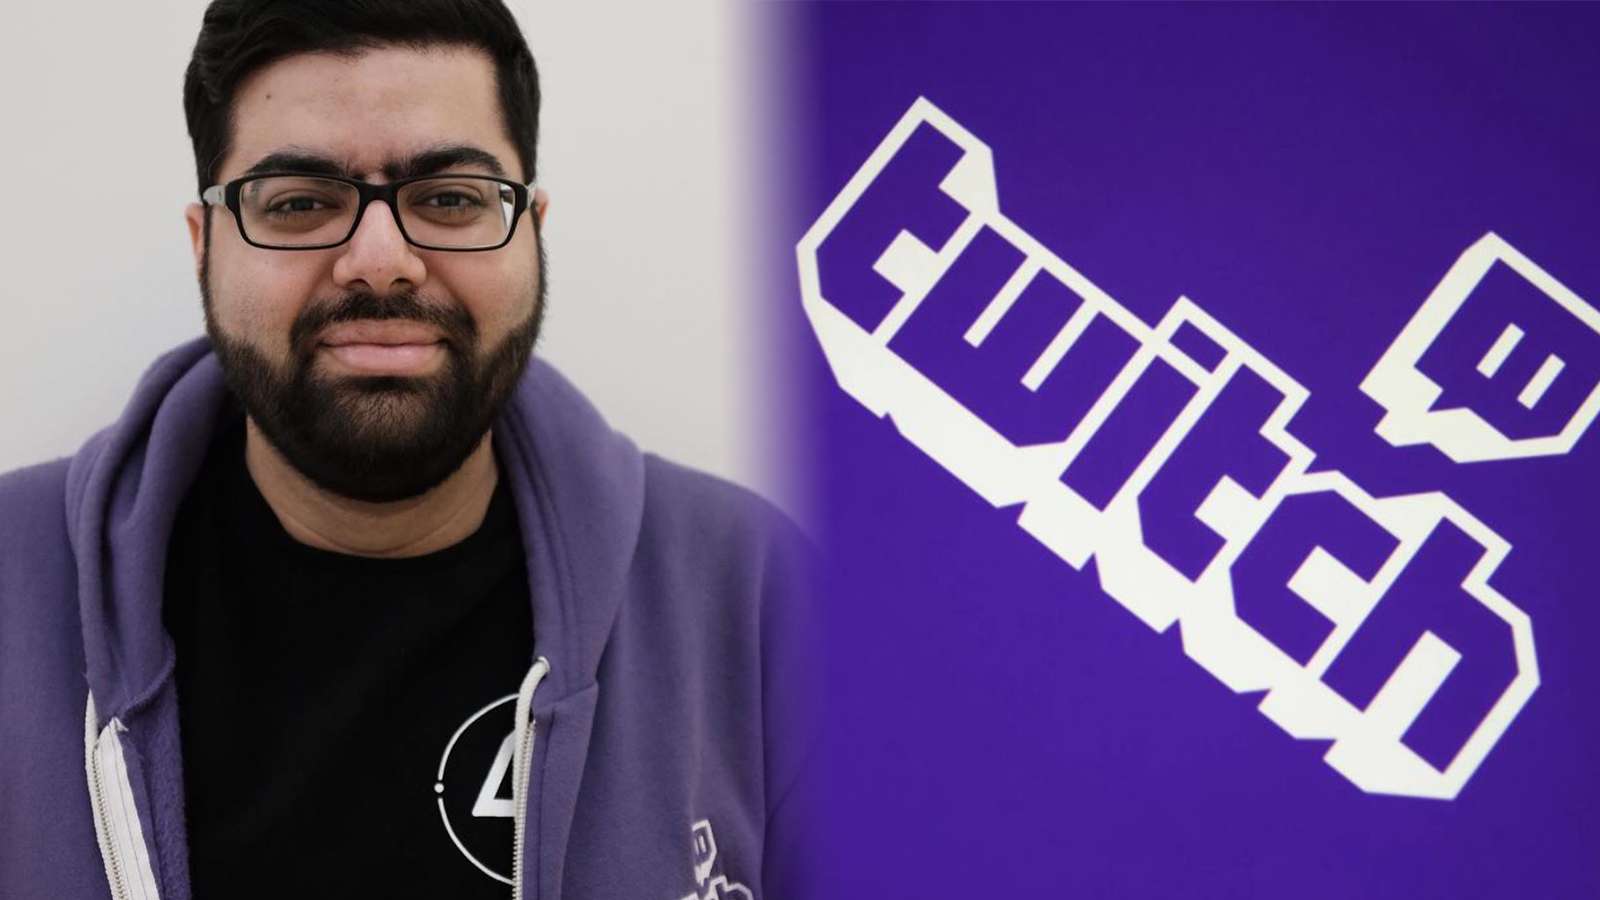 Hassan banned Twitch